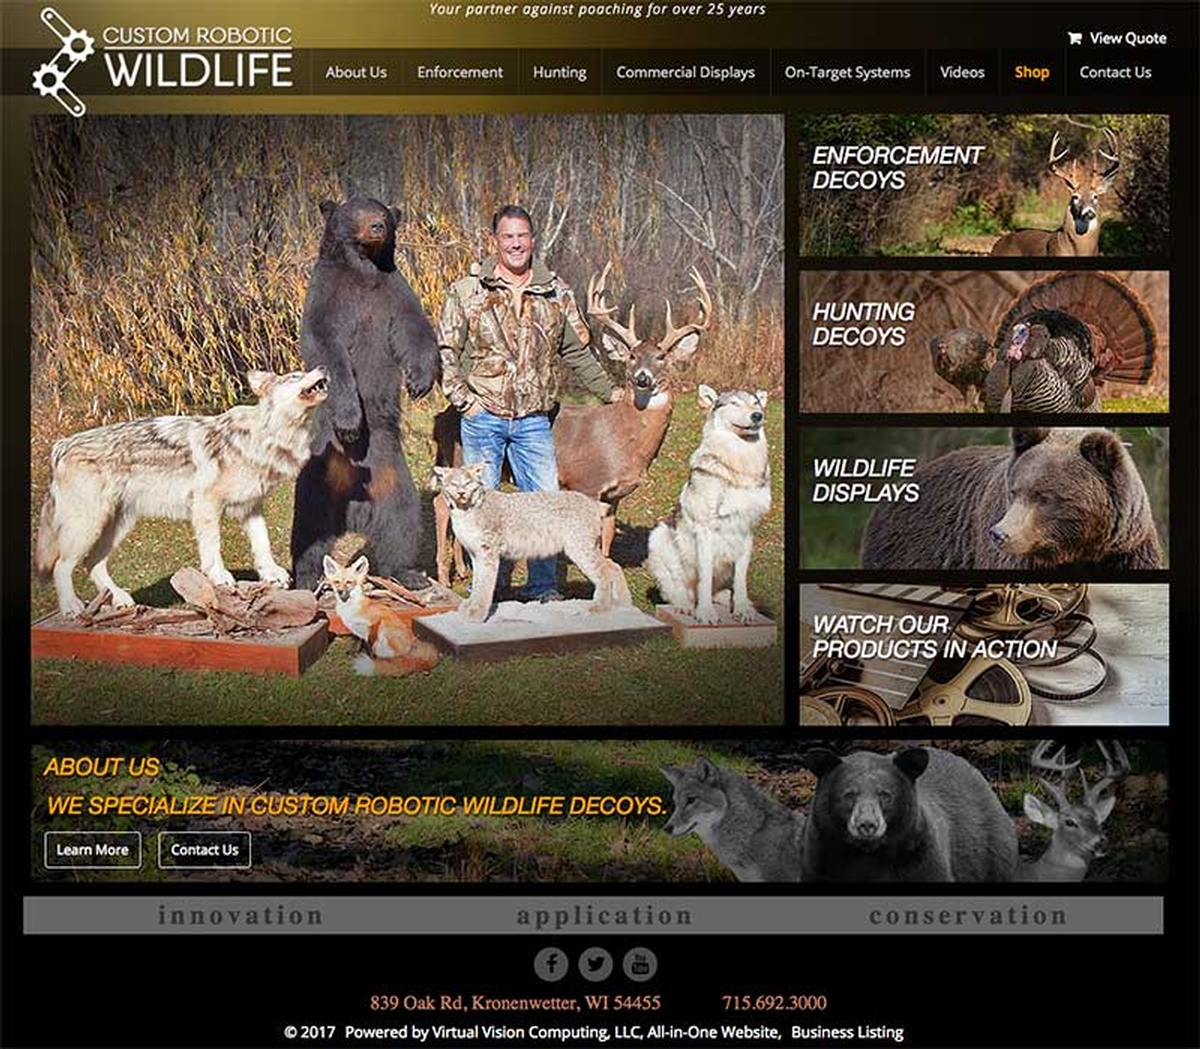 Virtual Vision recently launched a new website for Custom Robotic Wildlife